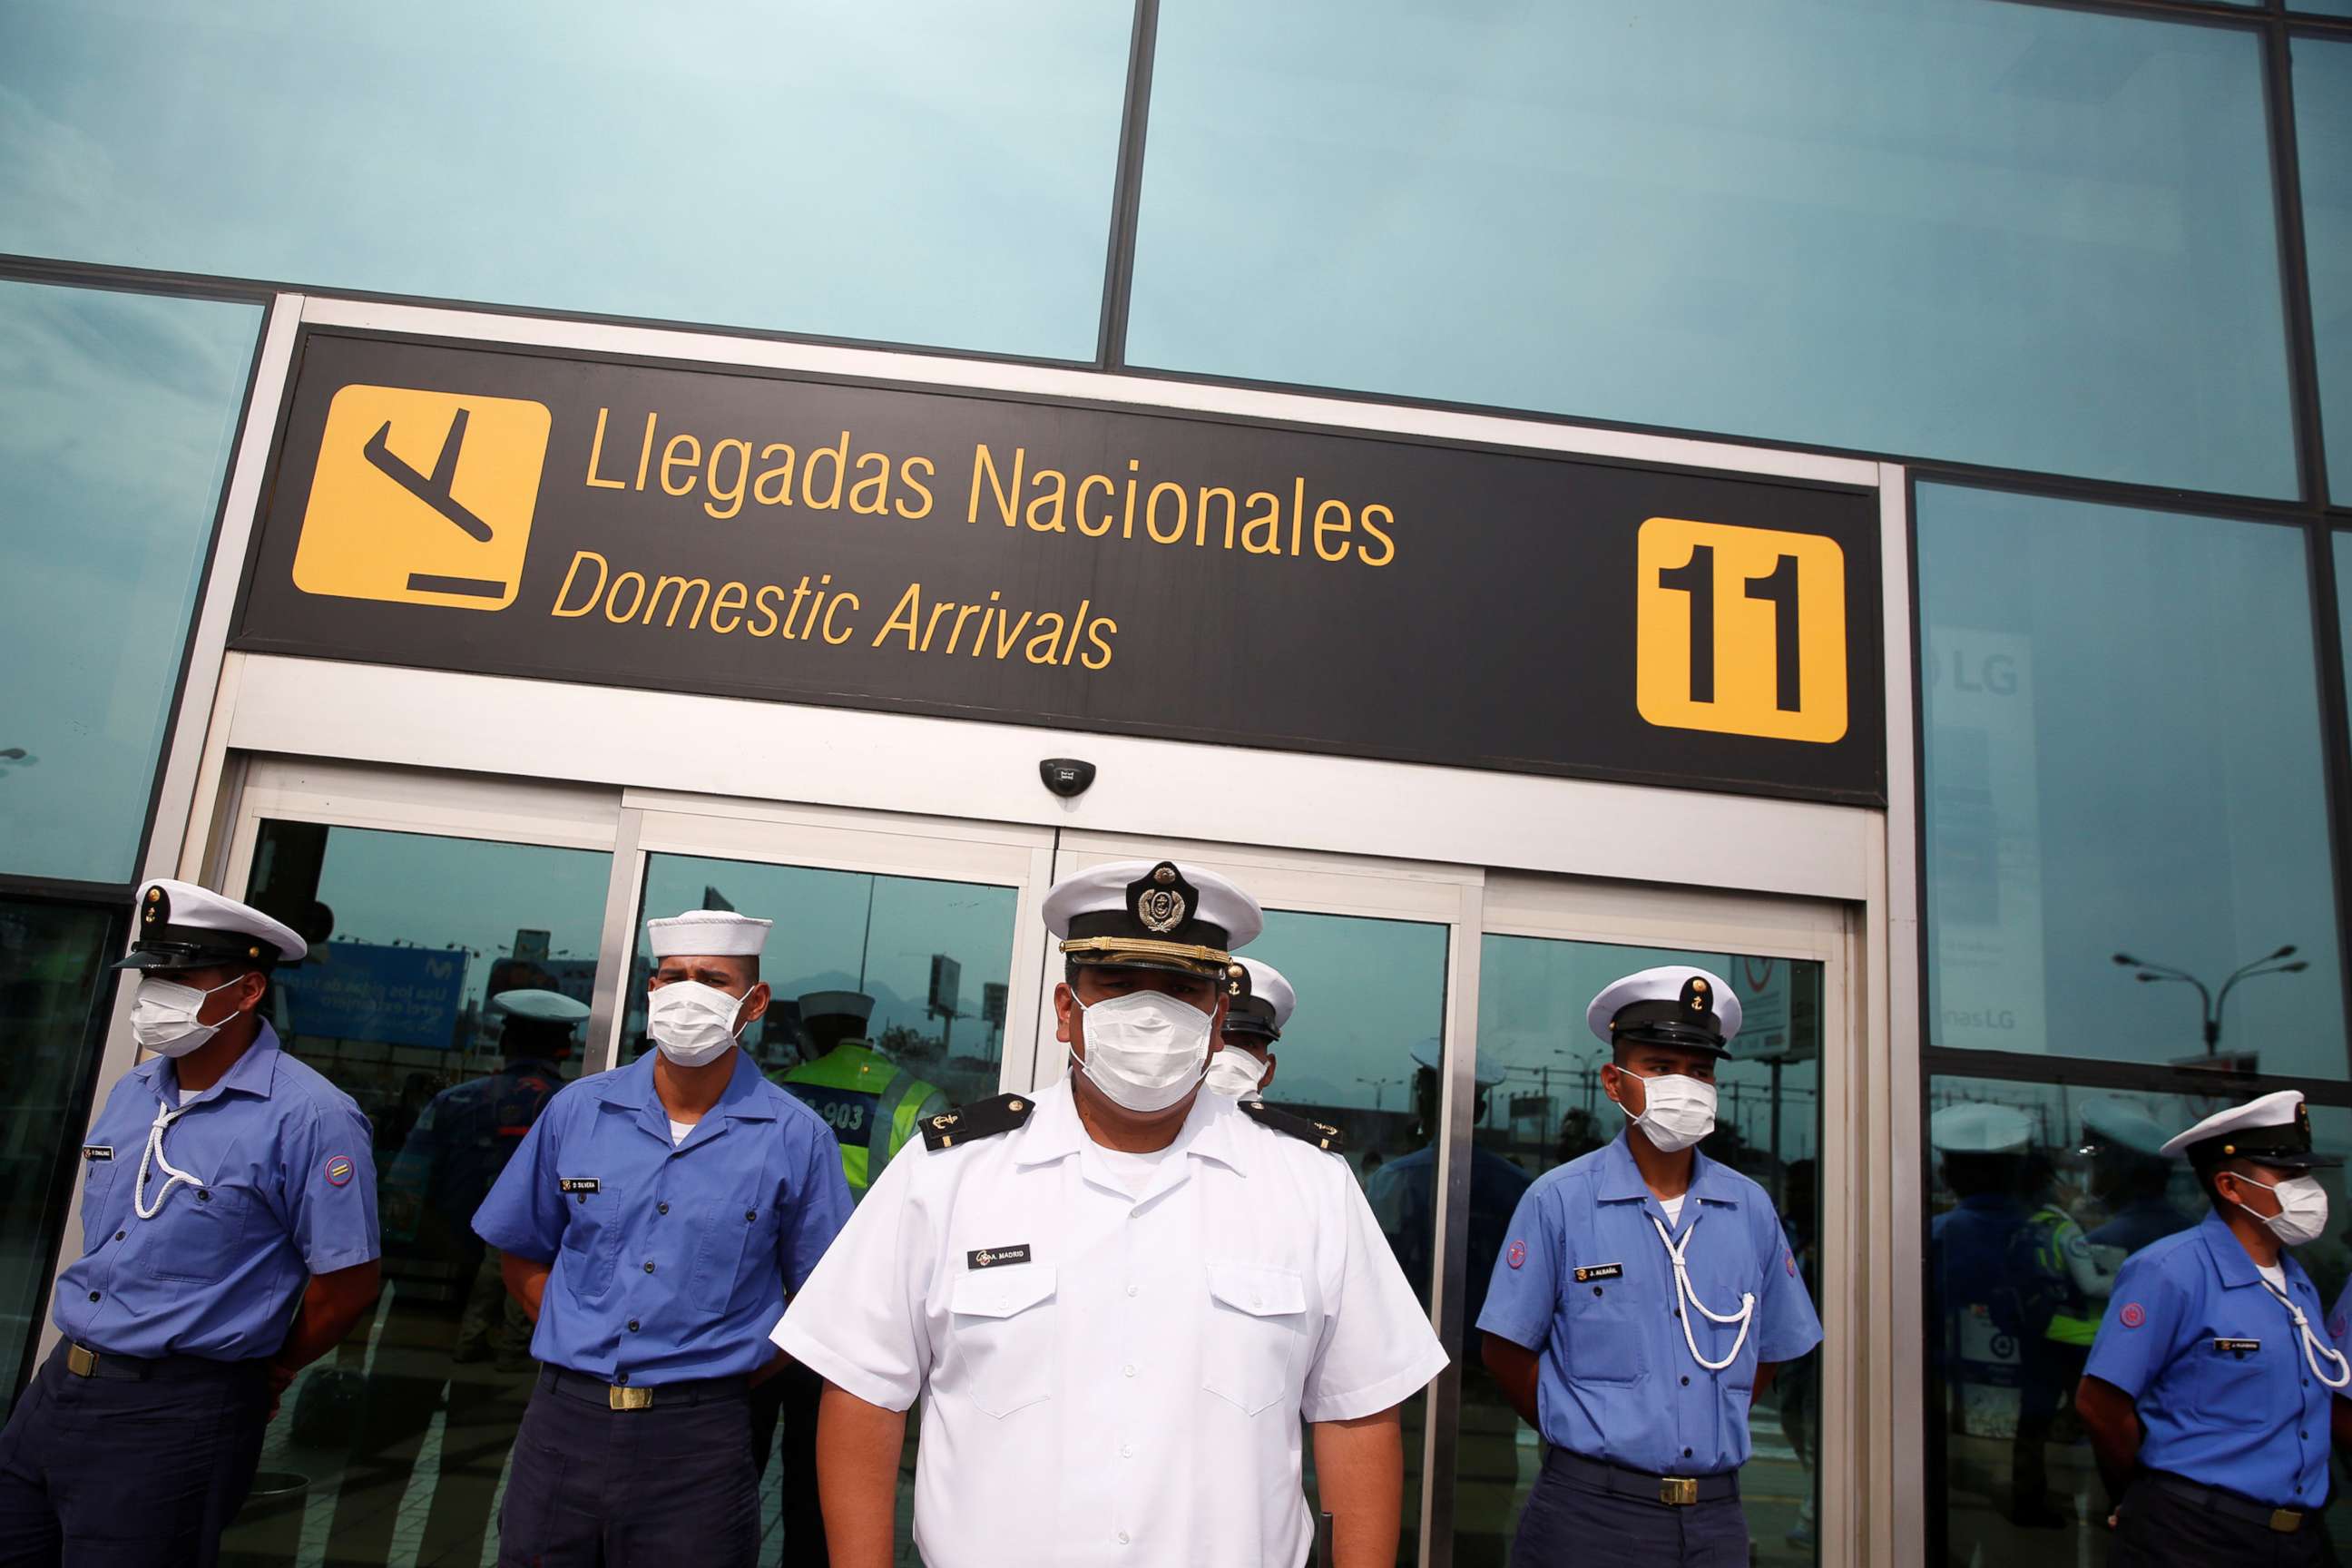 PHOTO: Sailors with the Peruvian Navy stand guard outside Jorge Chavez International Airport after the Peruvian government closed the country's borders in response to the coronavirus outbreak, in Lima, Peru, on March 17, 2020.